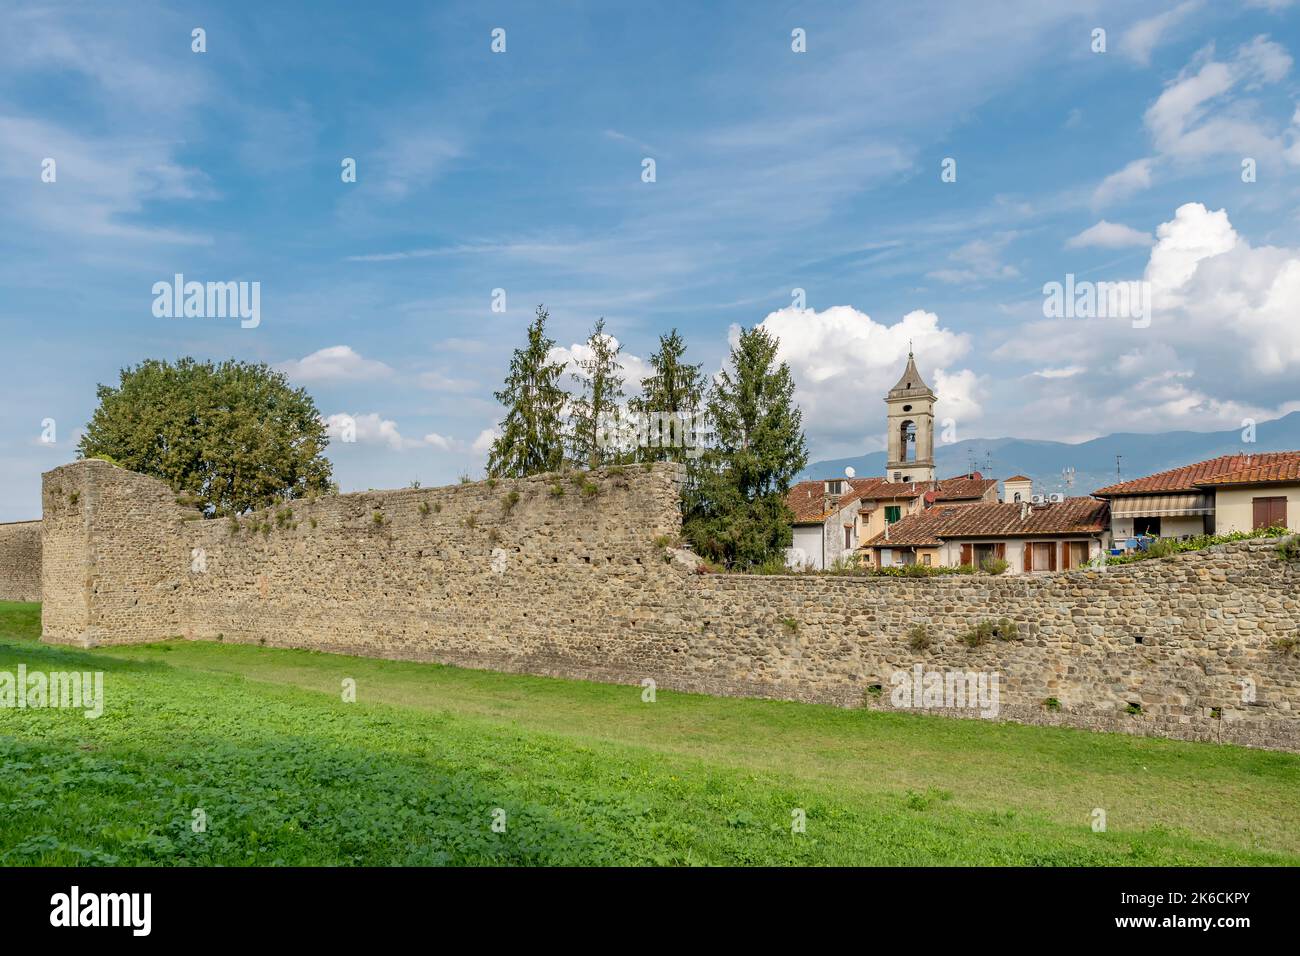 A glimpse of the historic center of Figline Valdarno, Florence, Italy, seen from the ancient perimeter walls Stock Photo